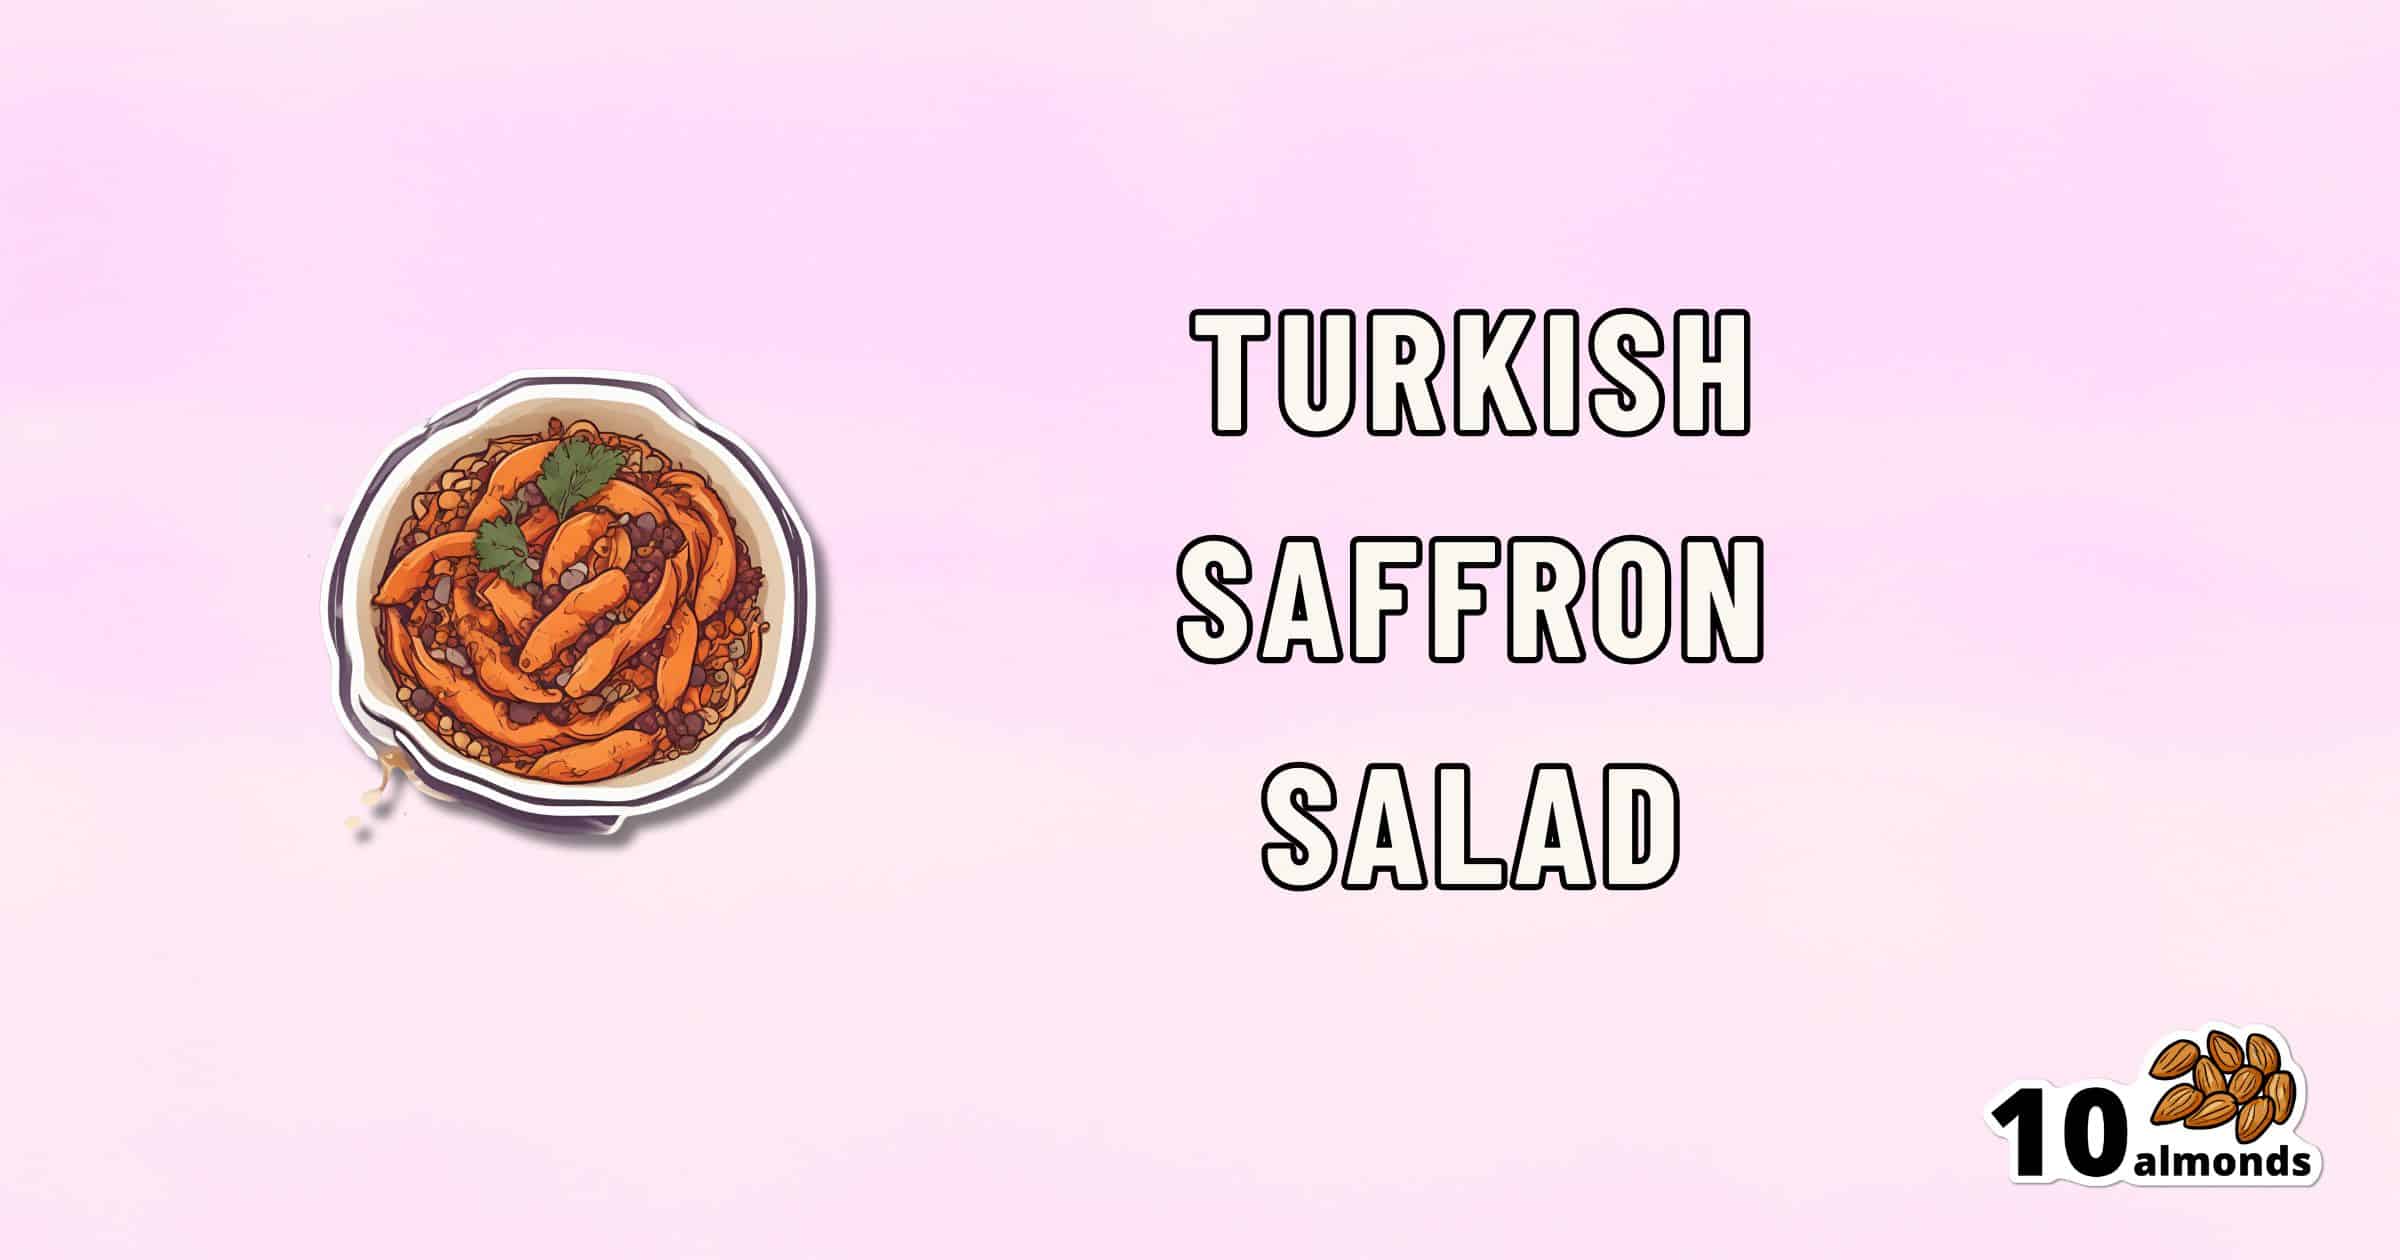 A bowl of luscious Turkish saffron salad graces the left side of the image. Boldly on the right, you see "TURKISH SAFFRON SALAD" with "10 almonds" and a charming almond illustration below. The background elegantly transitions from light pink to white.